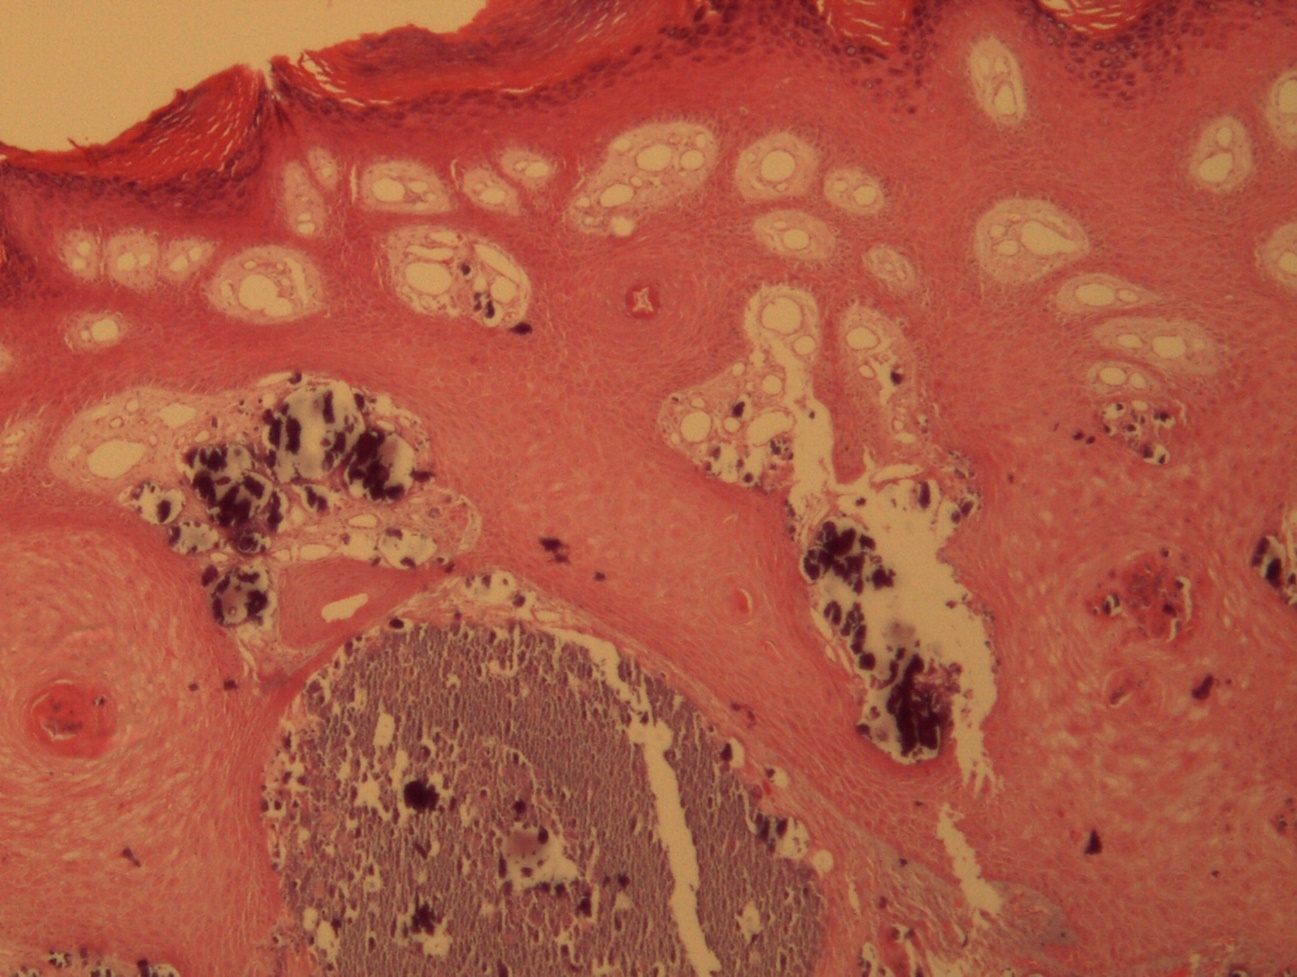  Hyperkeratosis, hypergranulosis, proliferation of dermal vessels, and surface and deep calcium deposits. HE. 100x.